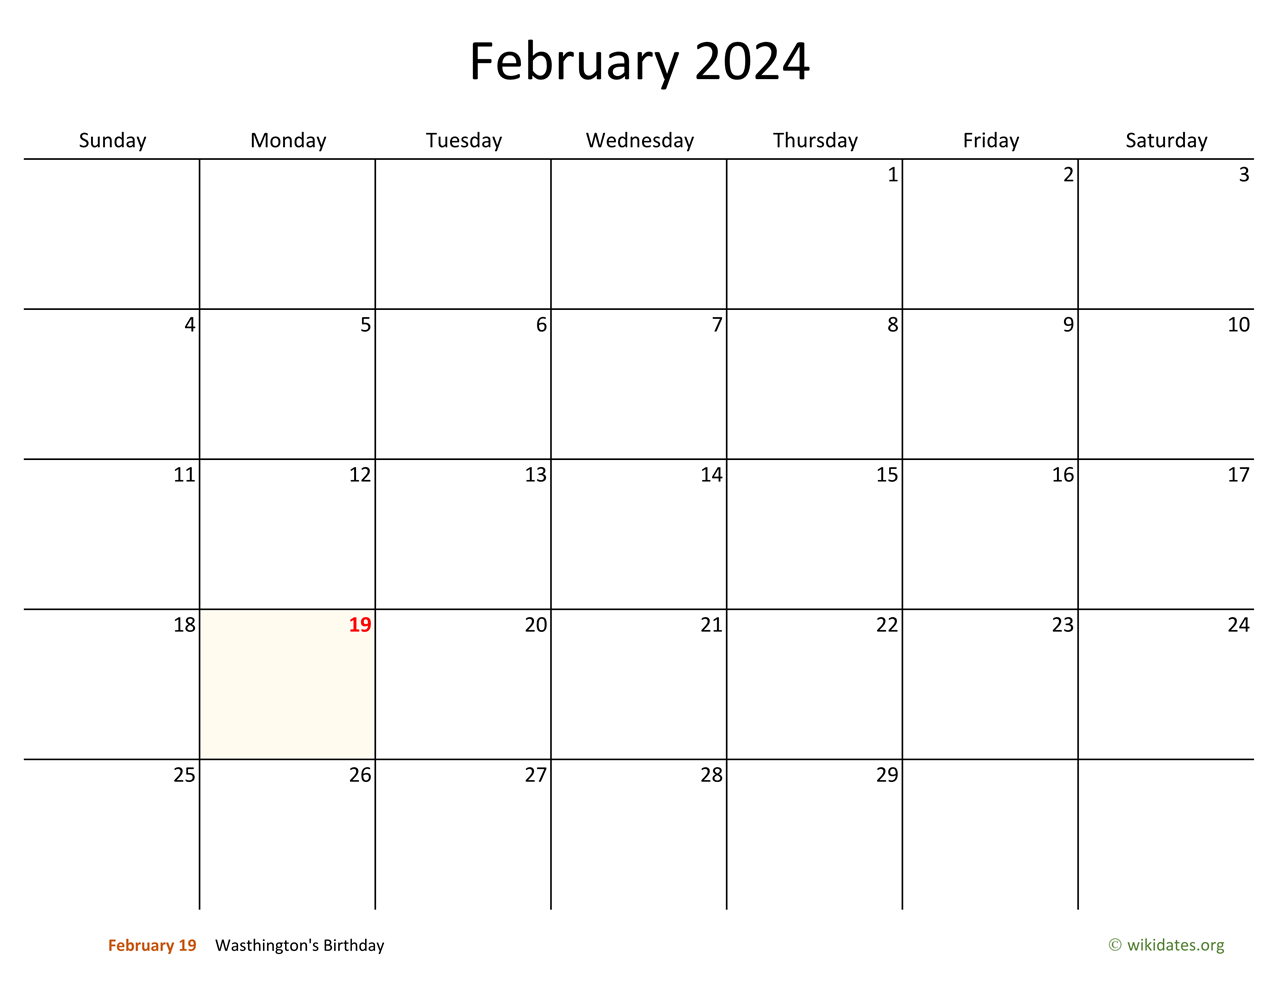 February 2024 Calendar with Bigger boxes